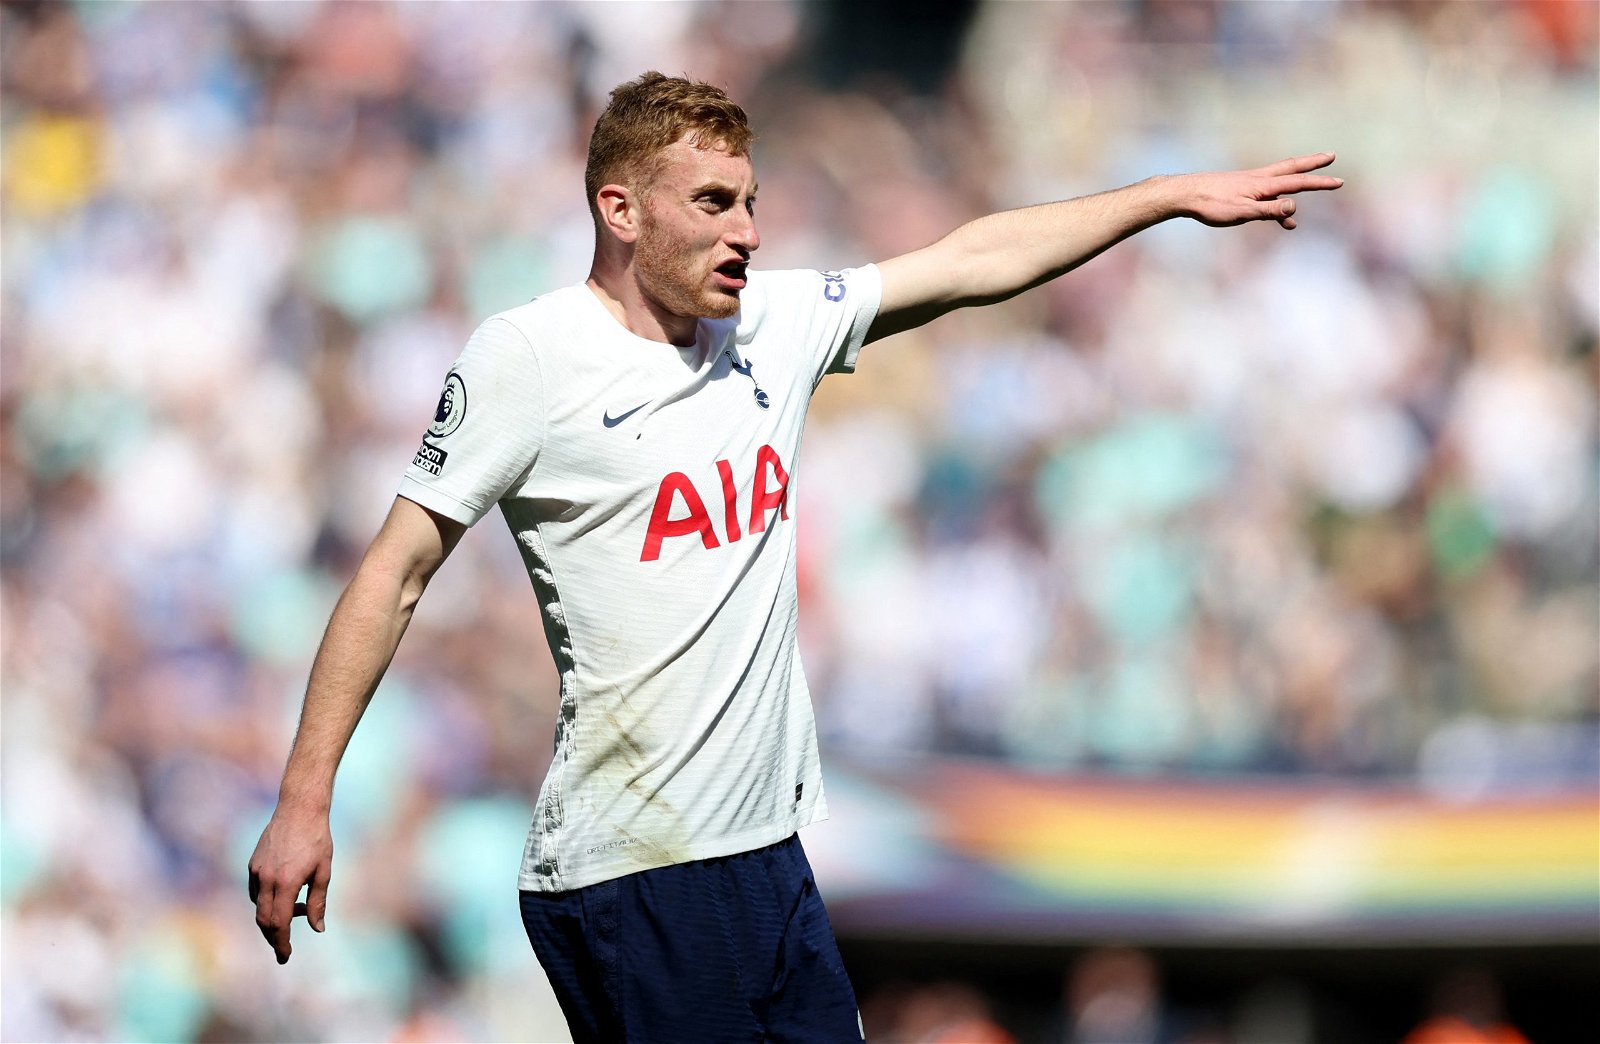 Ian Wright believes Spurs should sign this midfielder on a permanent deal